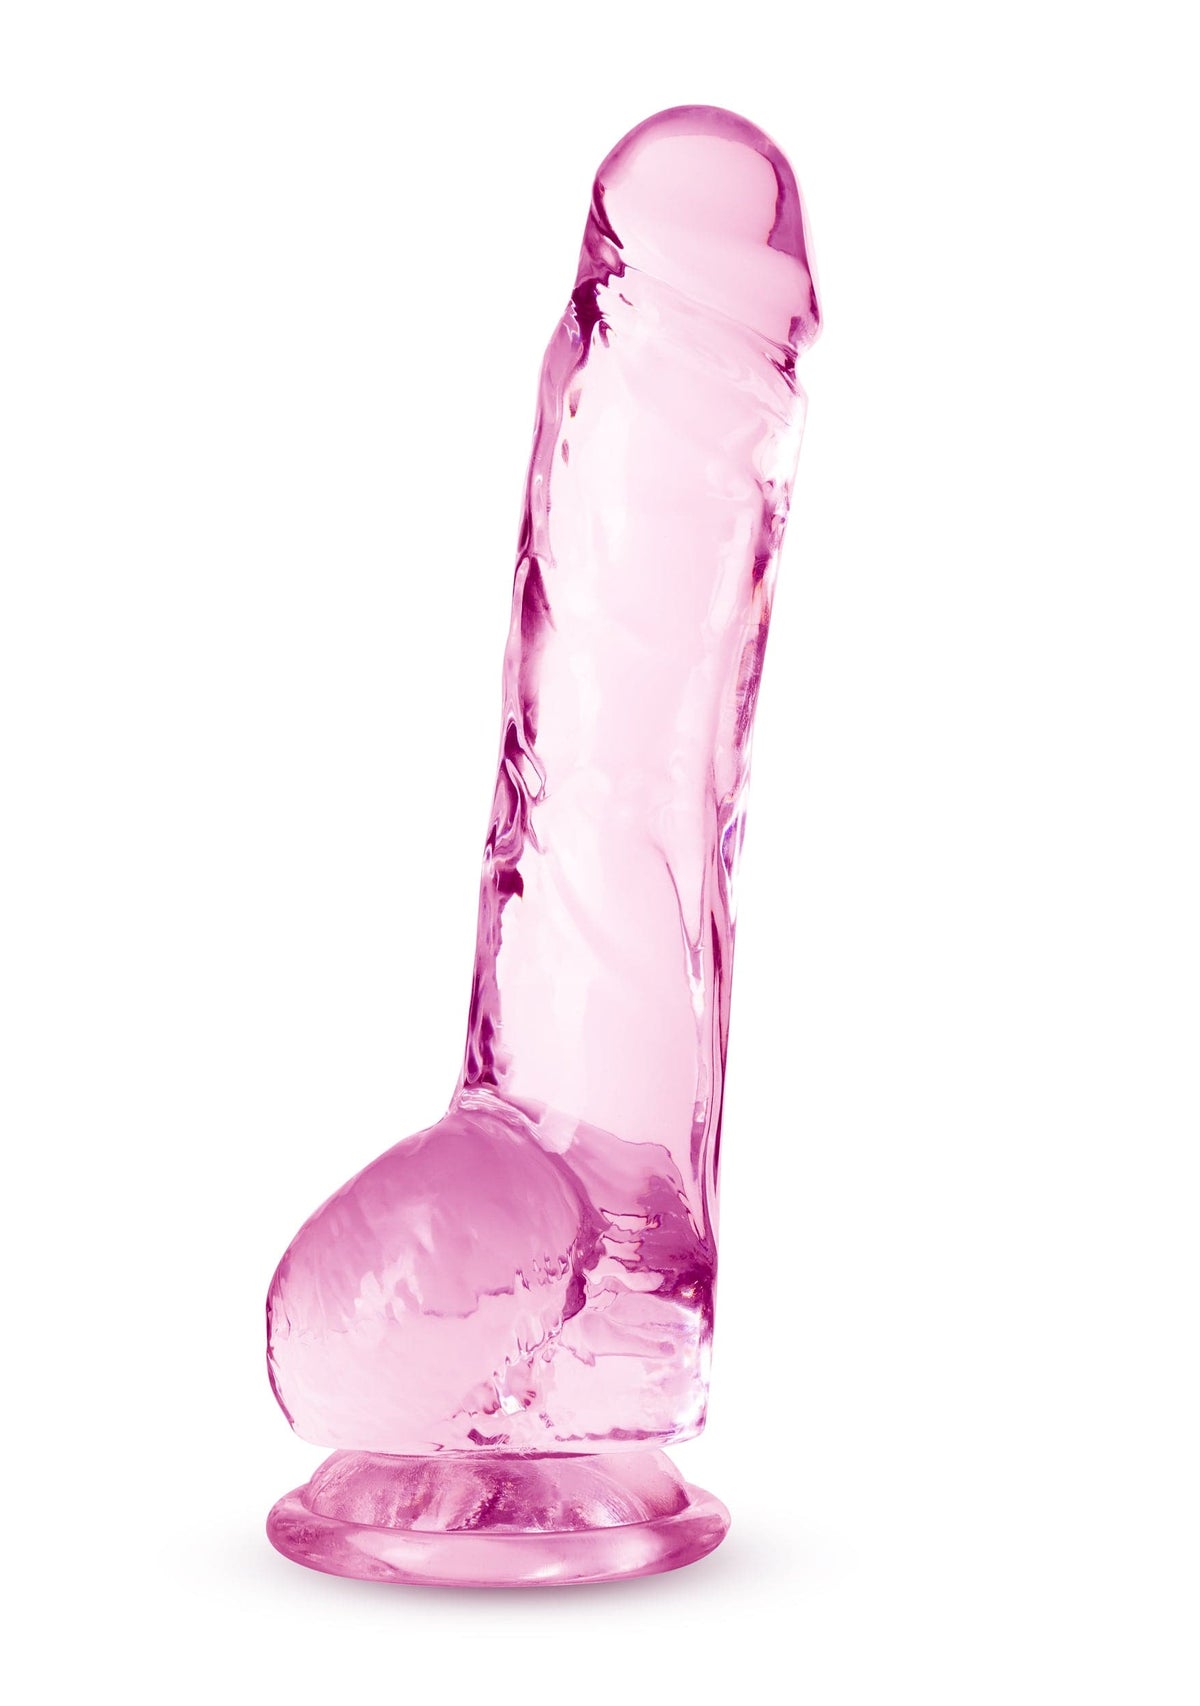 naturally yours 8 inch crystalline dildo rose